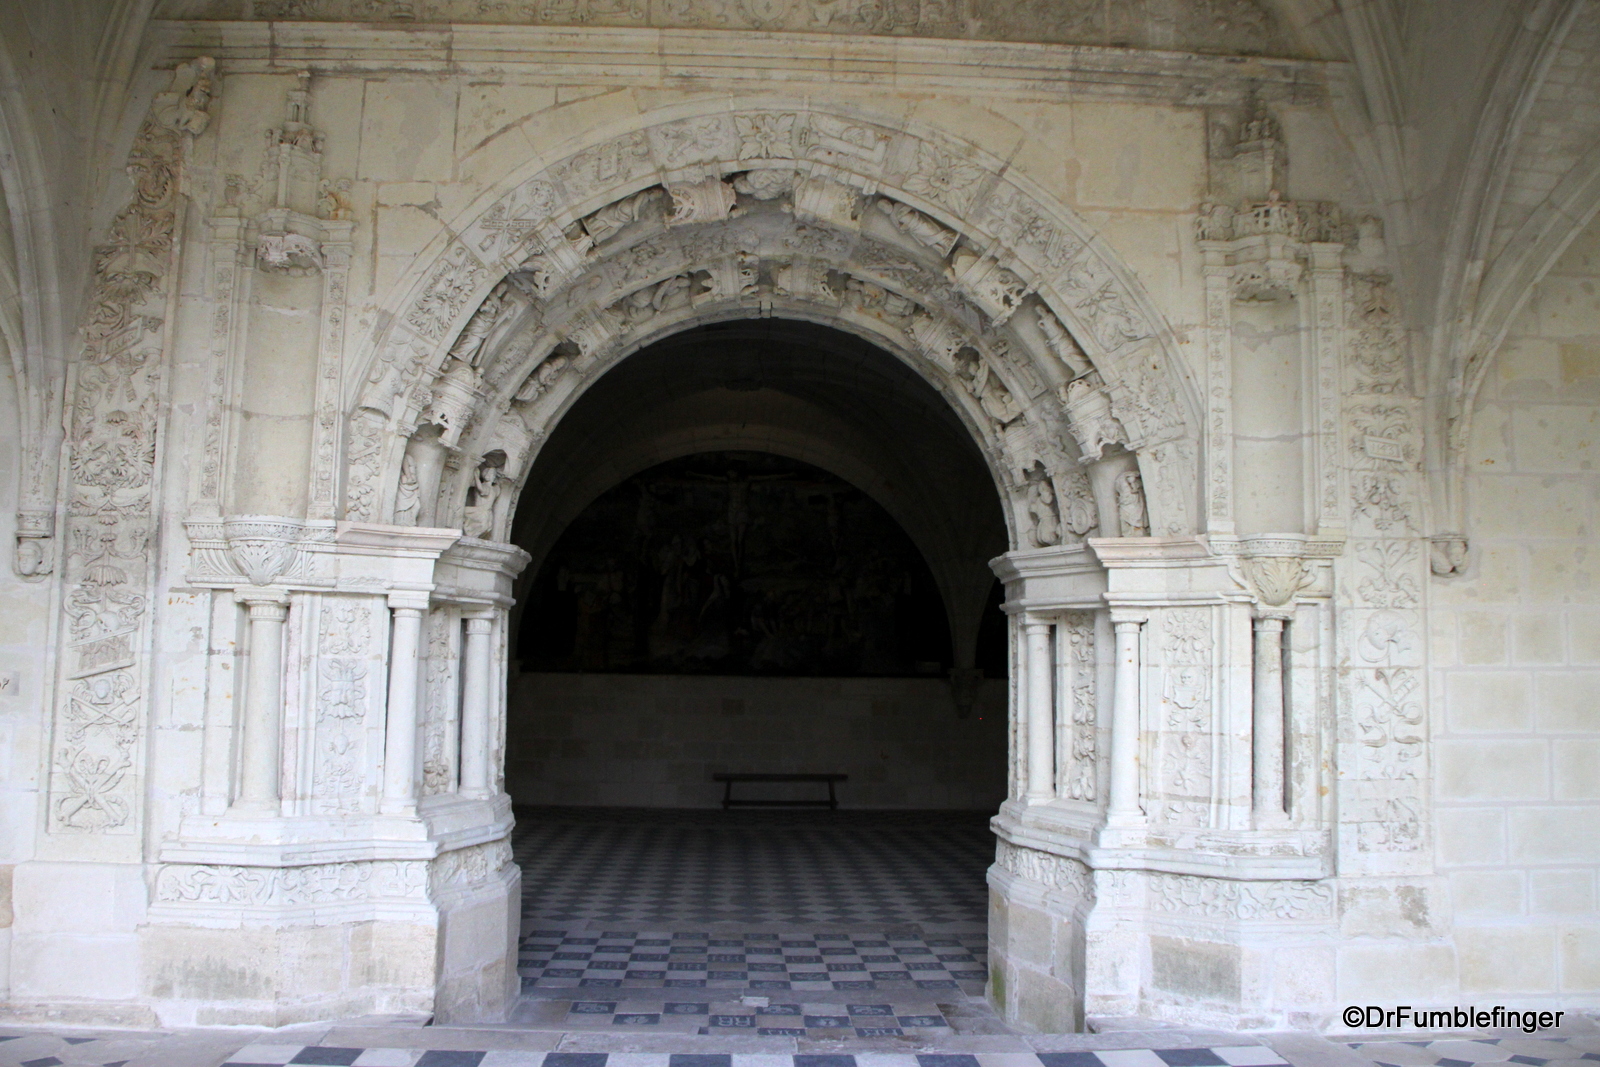 Entrance to Chapter House, Fontevraud Abbey